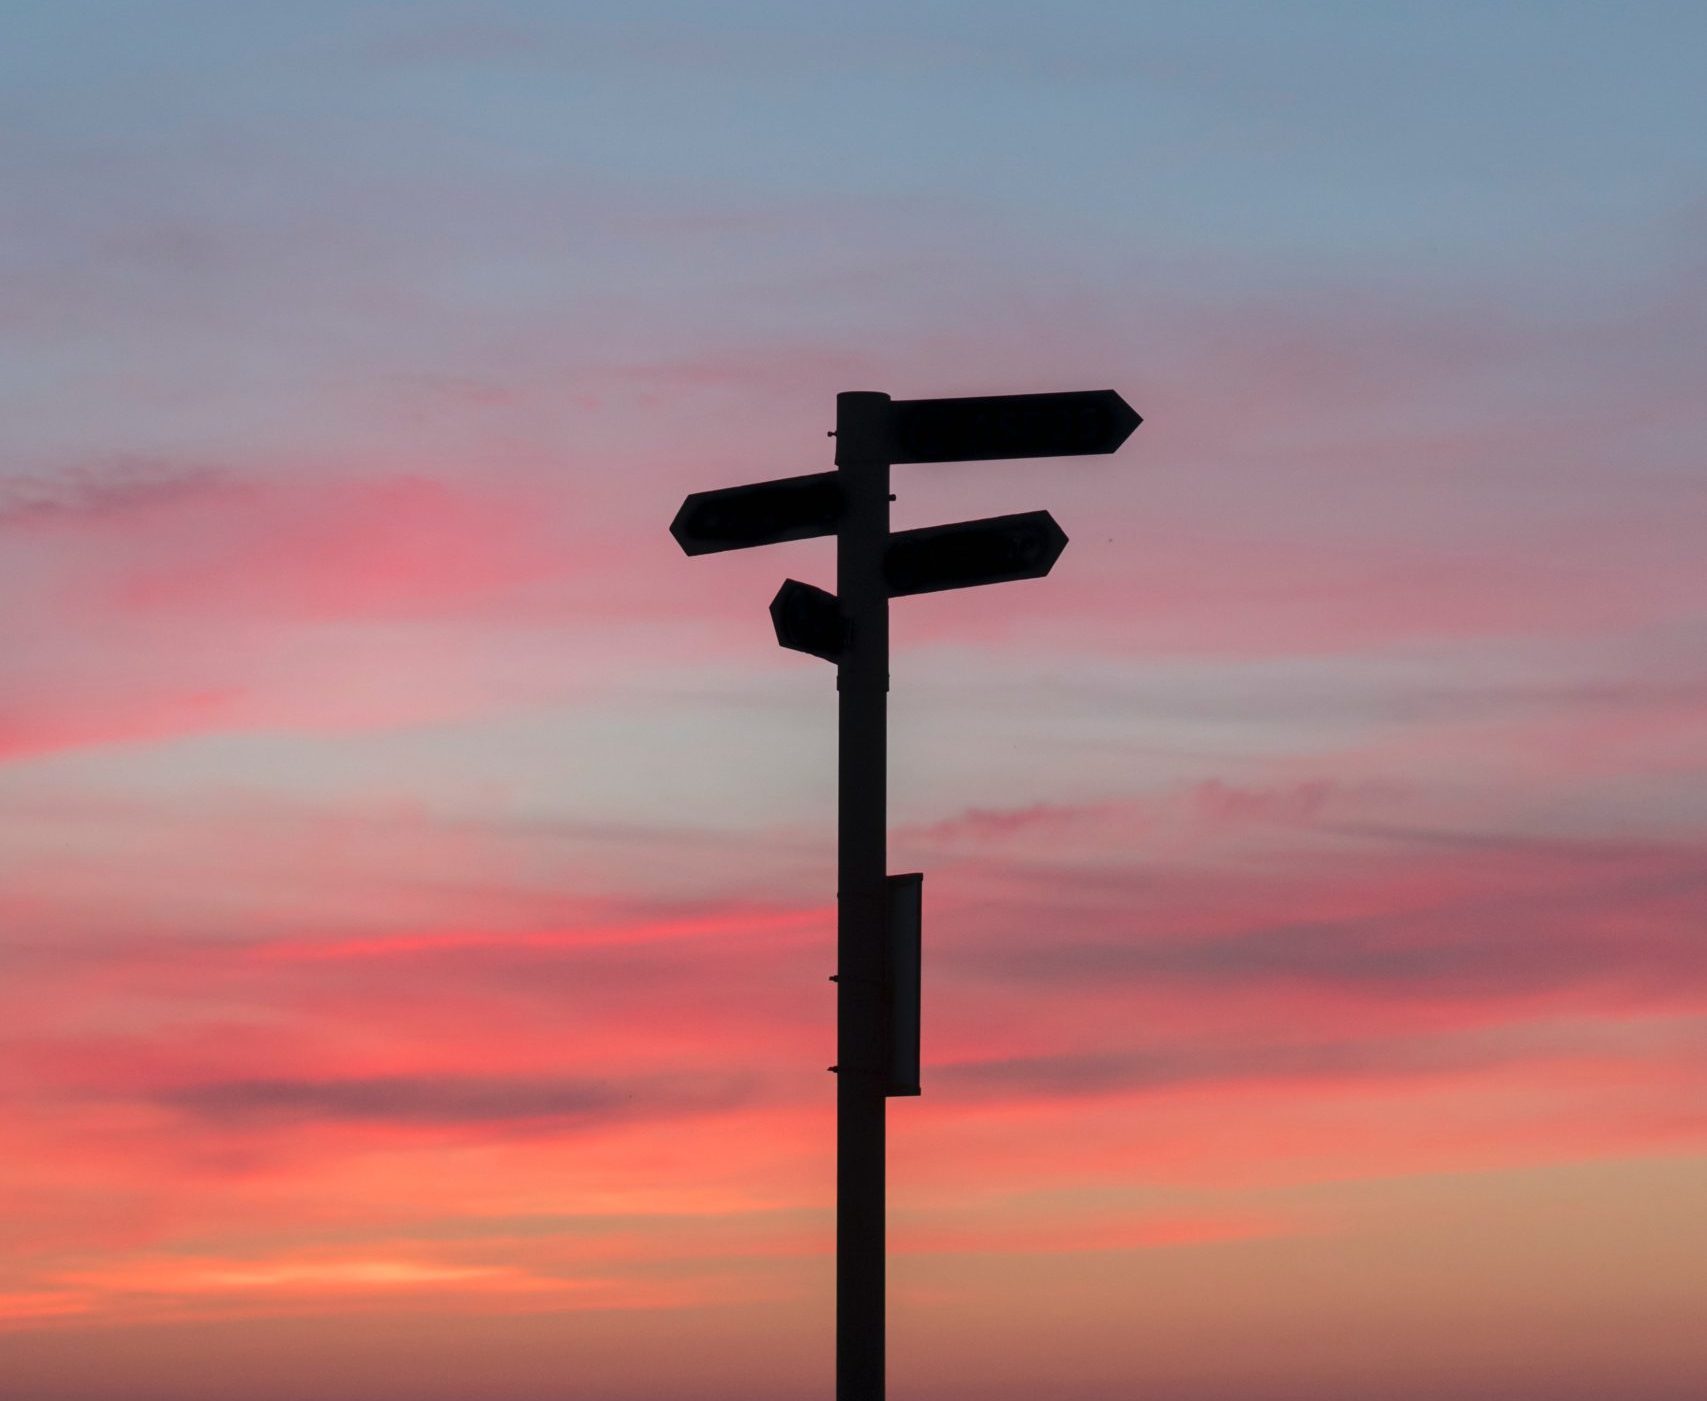 silhouette of directional sign on sunset